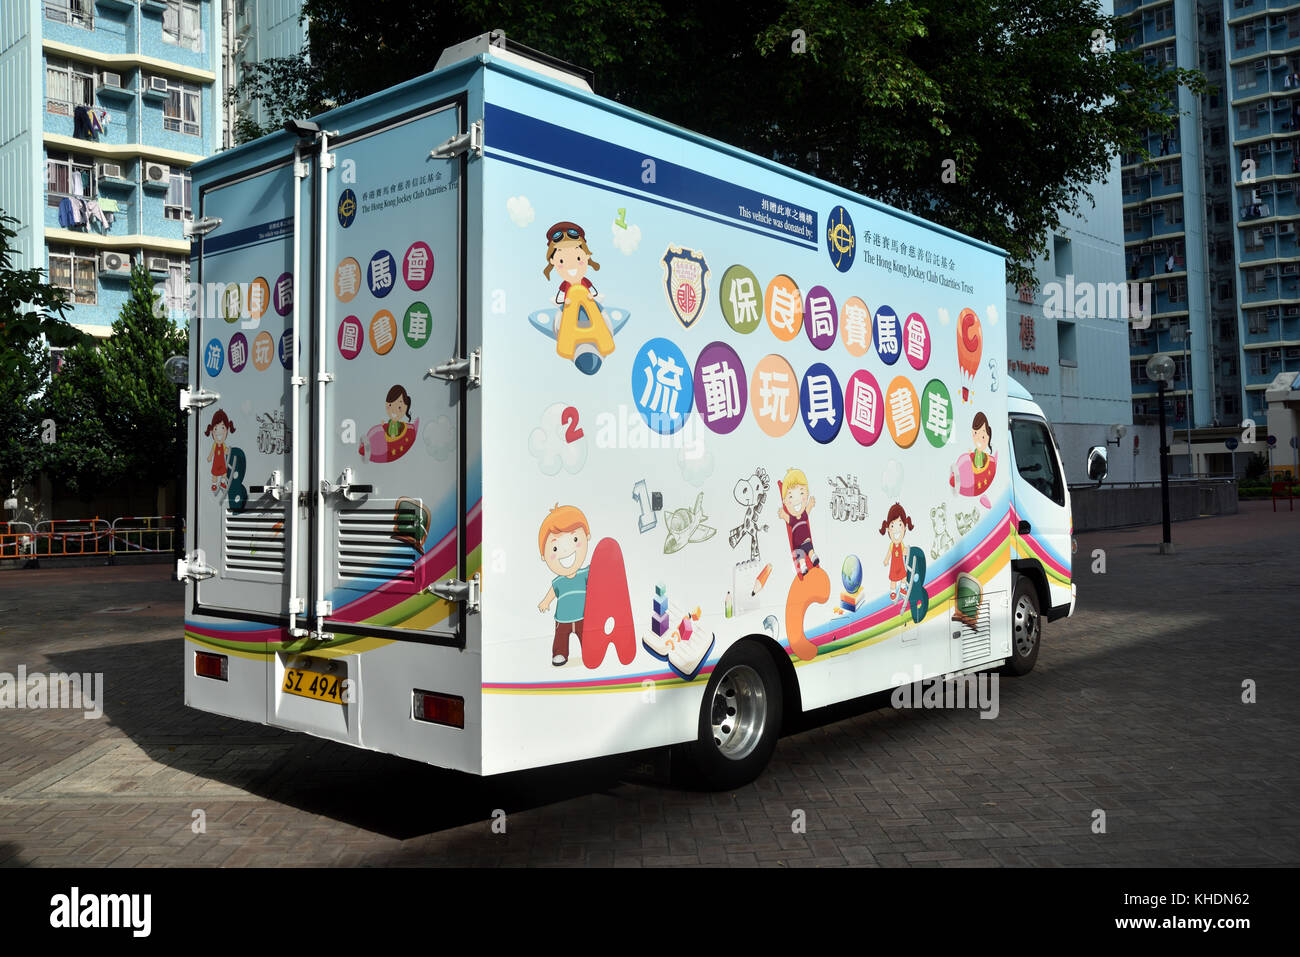 Mobile toy library, donated by charity organizations, provides educational services  to children in various districts, Hong Kong Stock Photo